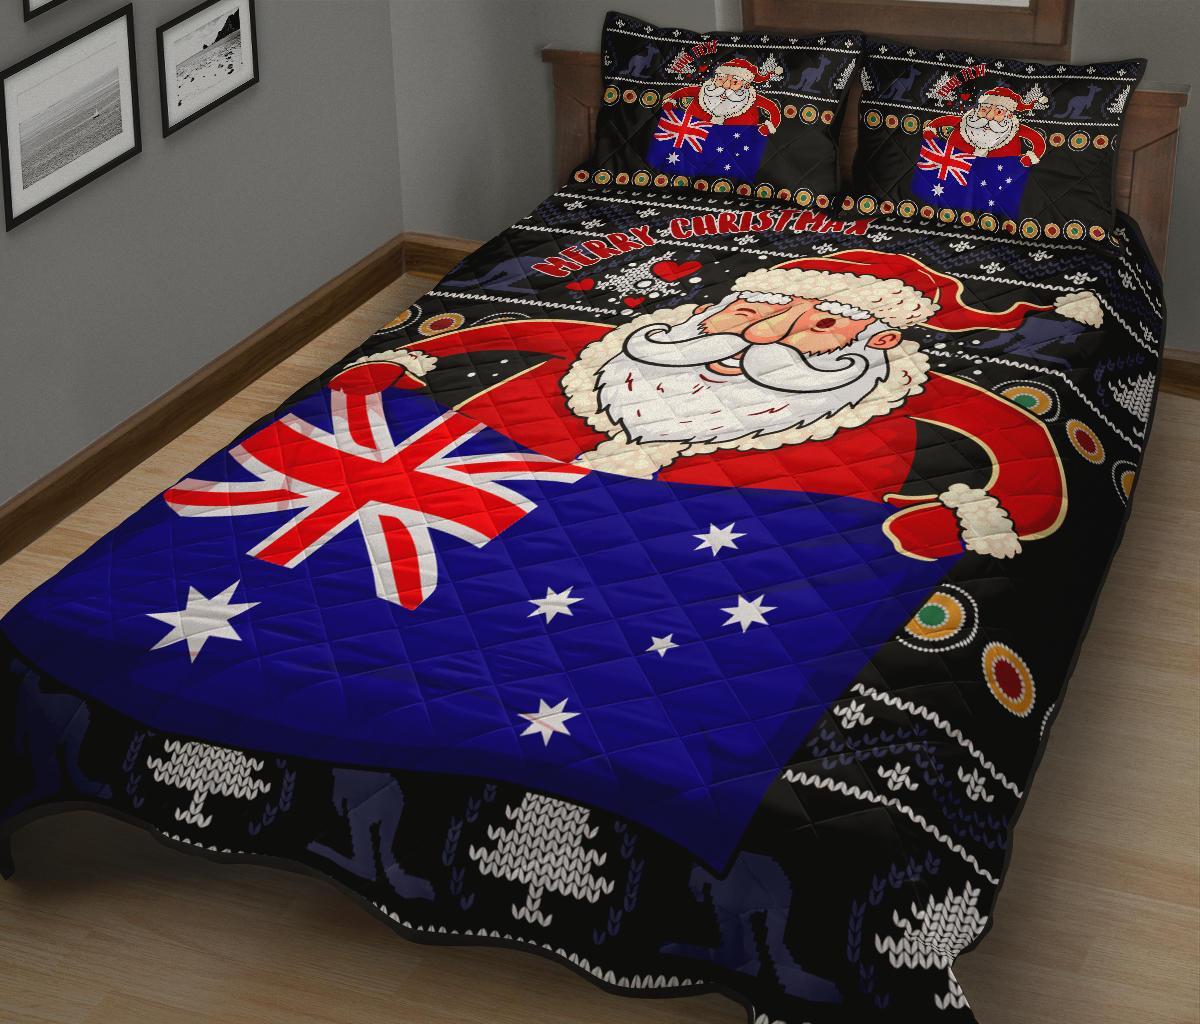 Christmas Personalised Quilt Bed Set - Australia Santa Claus Hold The Flag ( Black)